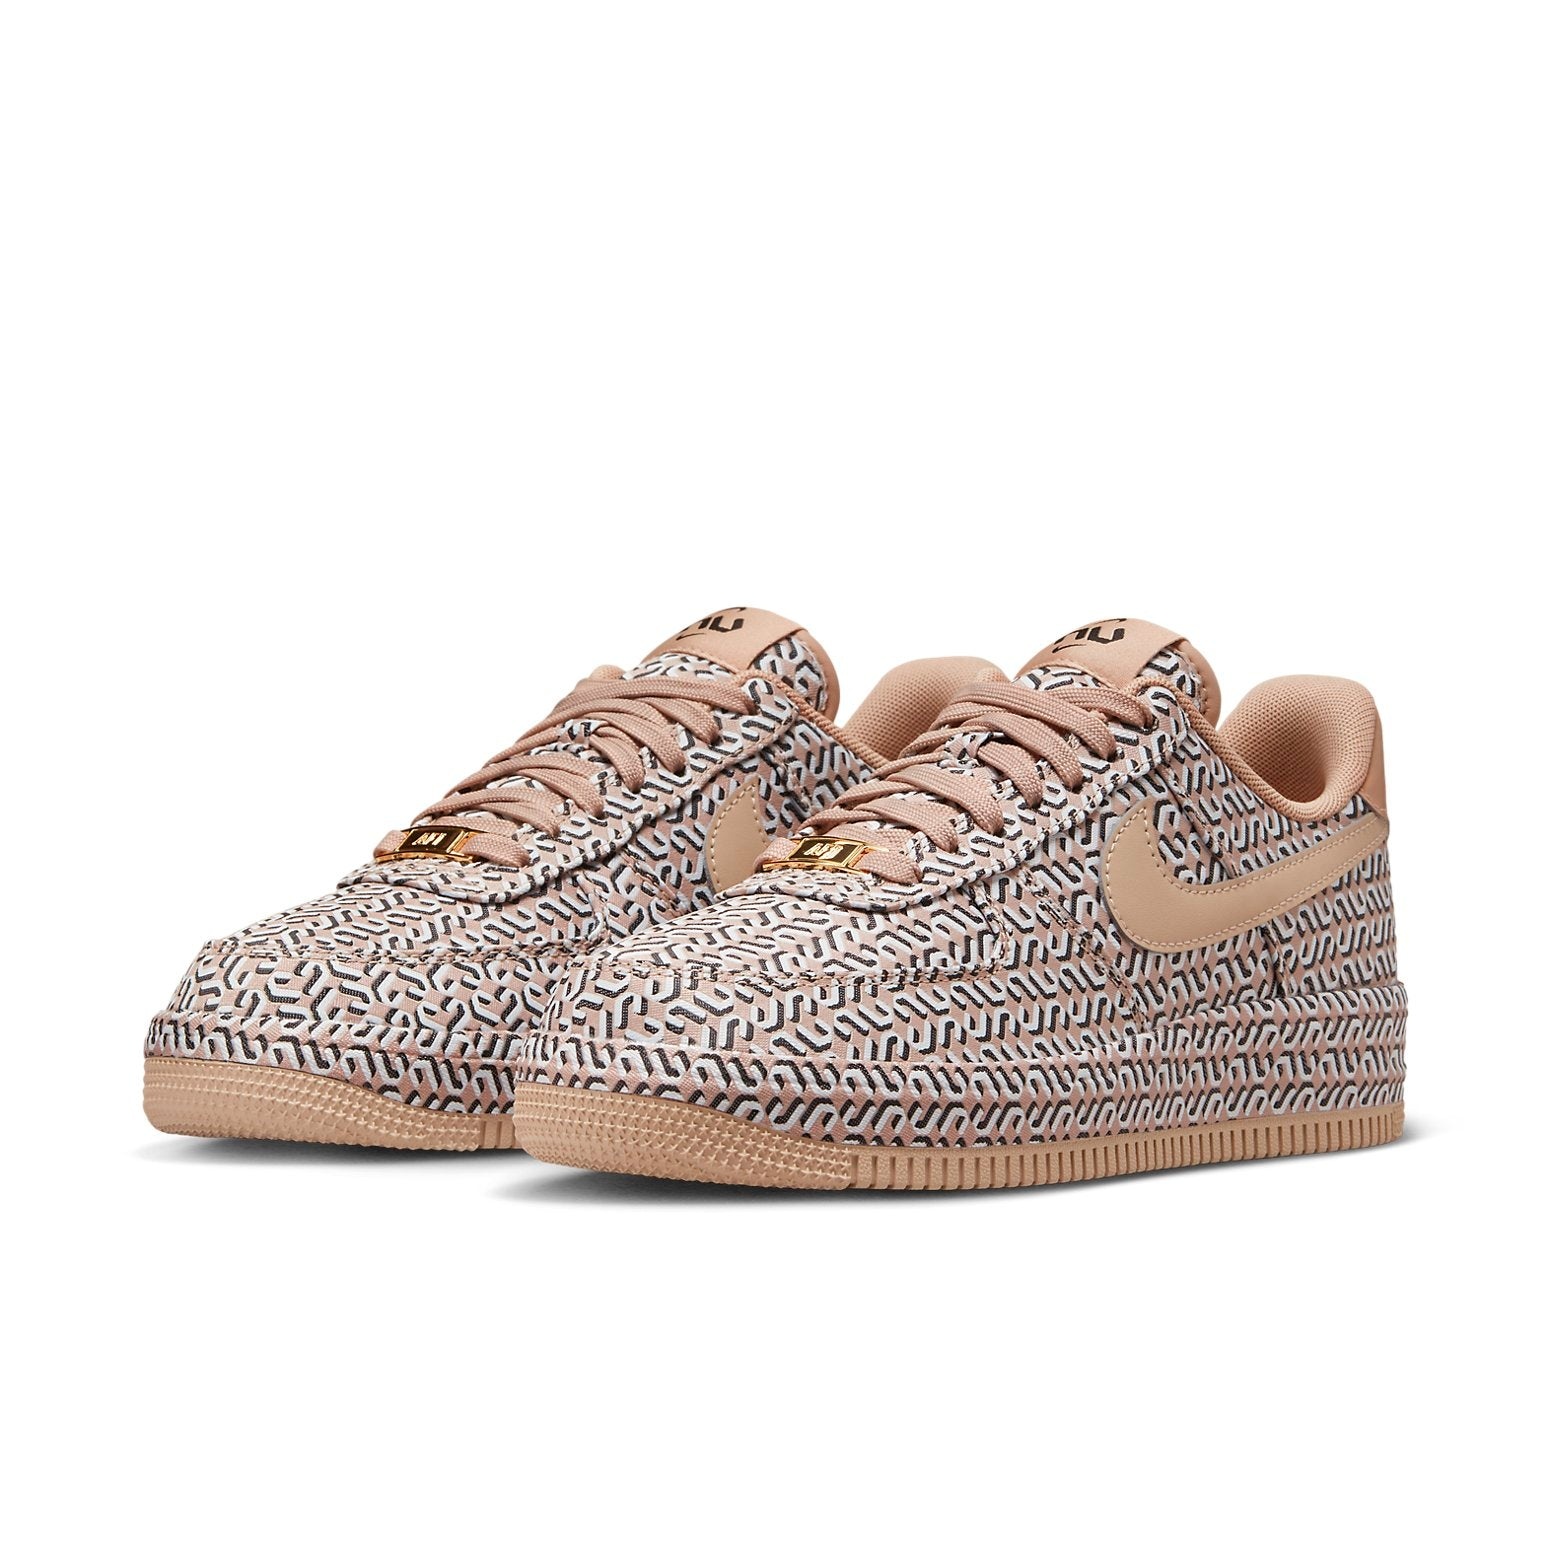 (WMNS) Nike Air Force 1 Low LX 'United in Victory - Hemp' DZ2789-200 - 2